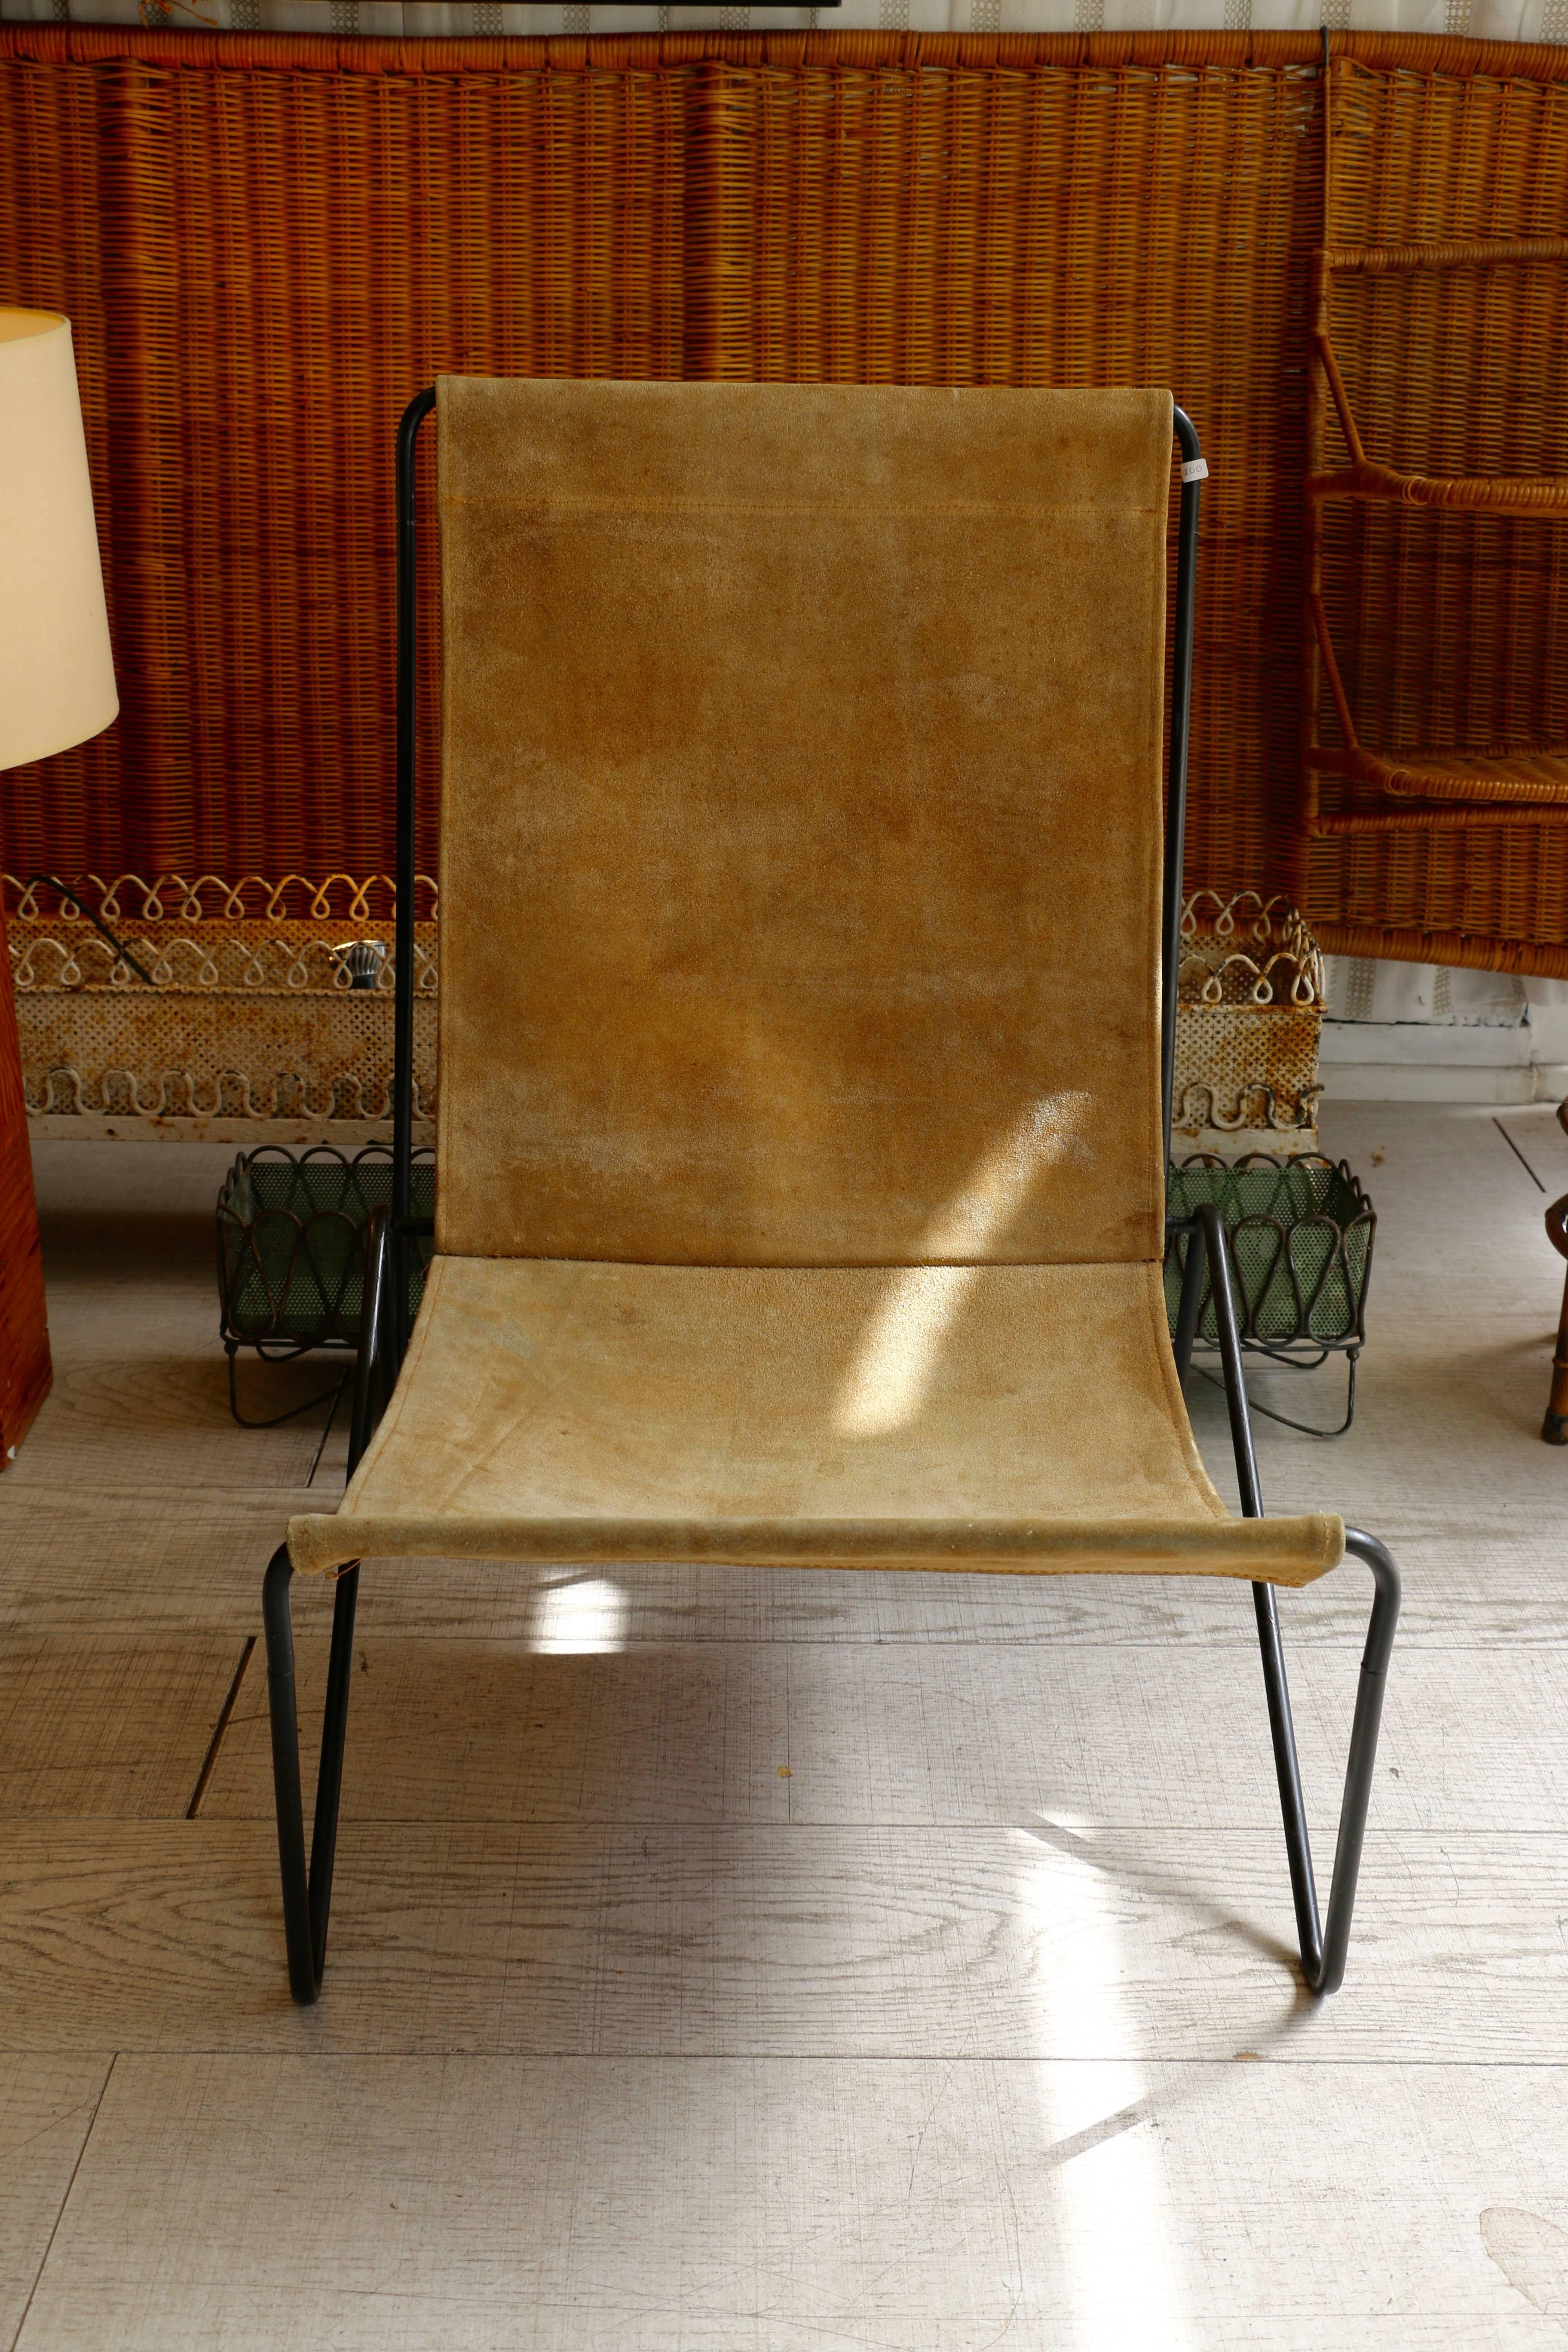 1950s, Verner Panton for Fritz Hansen, bachelor chair.
It is made of steel pipes painted in black with suede upholstery. The suede in old, so it has some stains, mostly on the back (see on pictures).